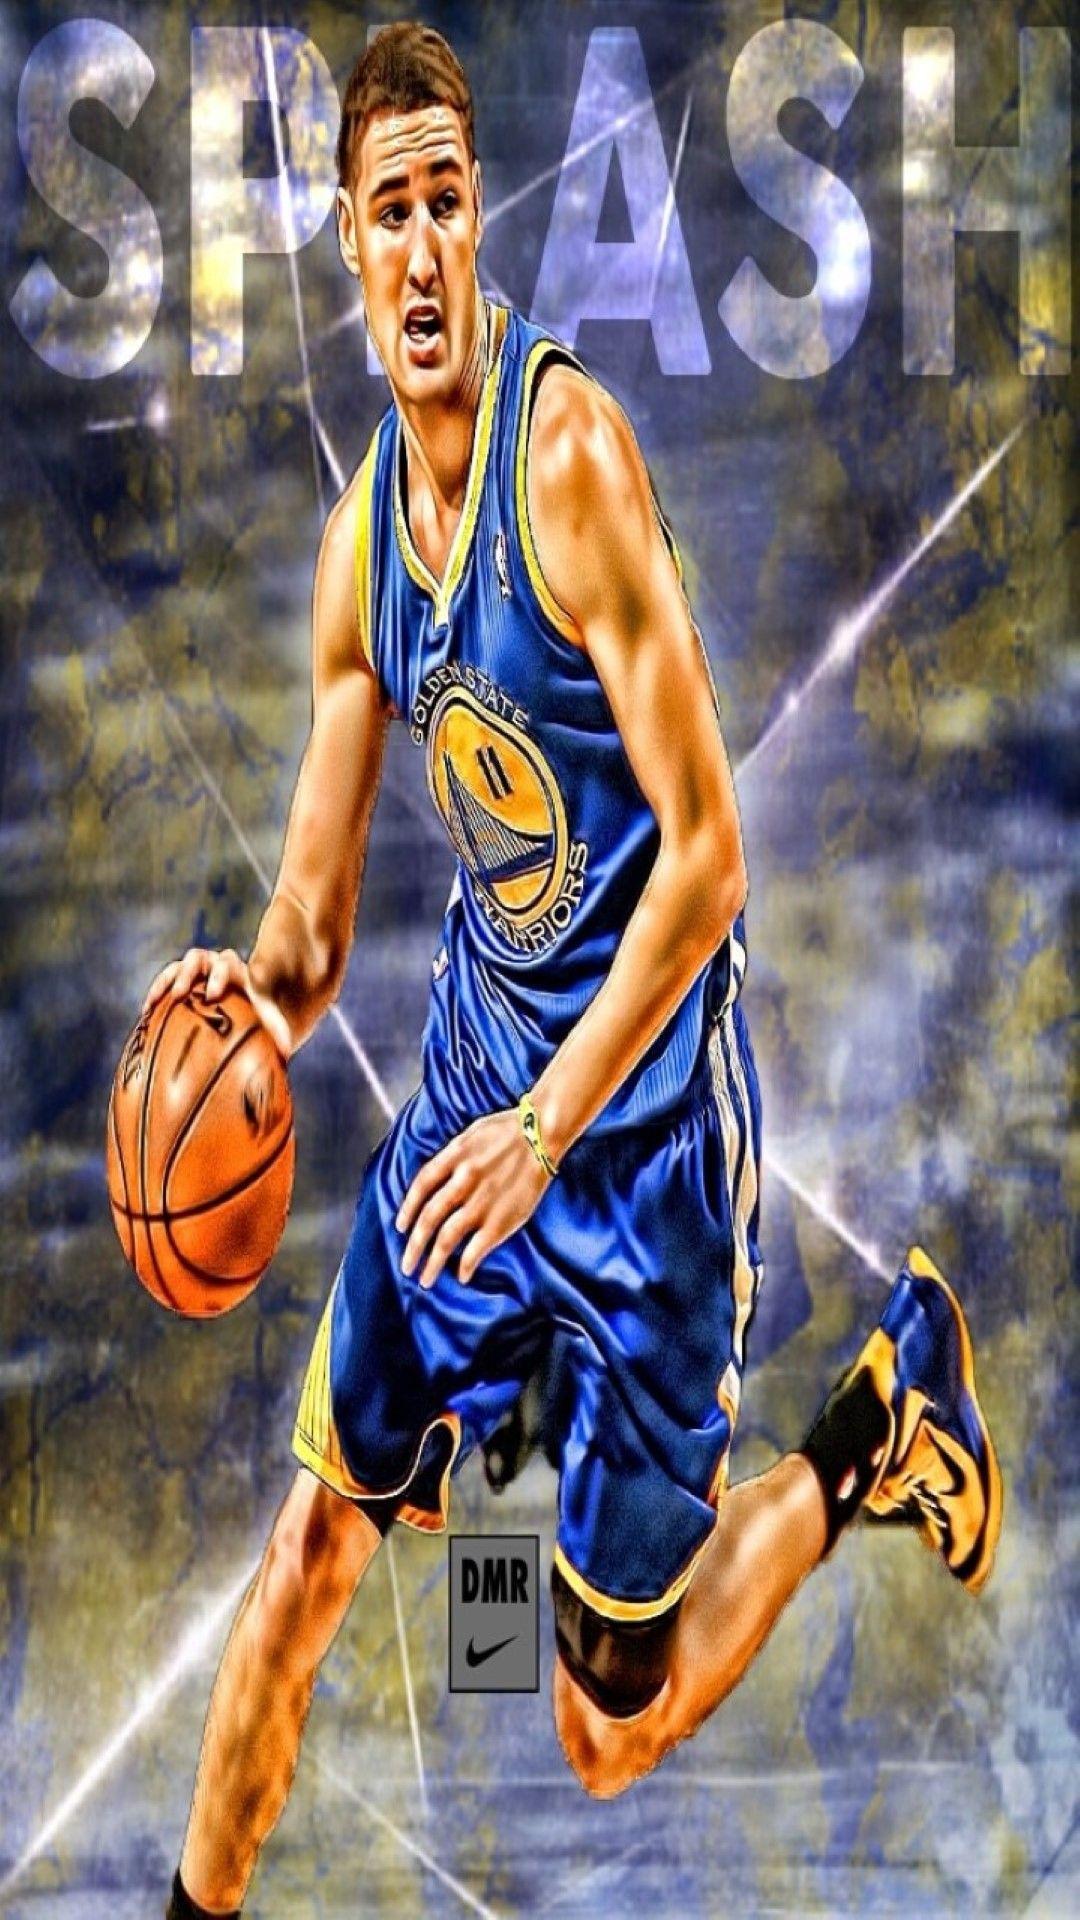 Related Keywords & Suggestions for Klay Thompson Wallpaper